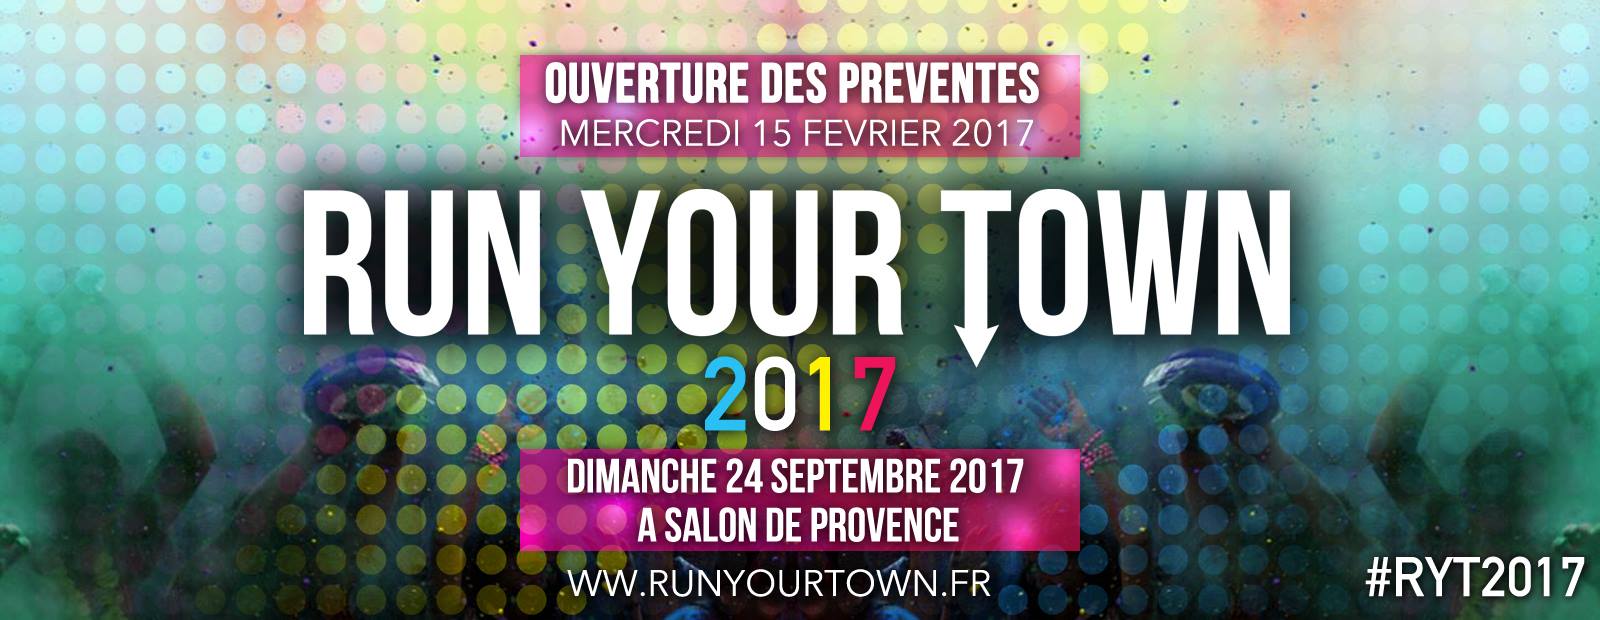 Run your town 2017